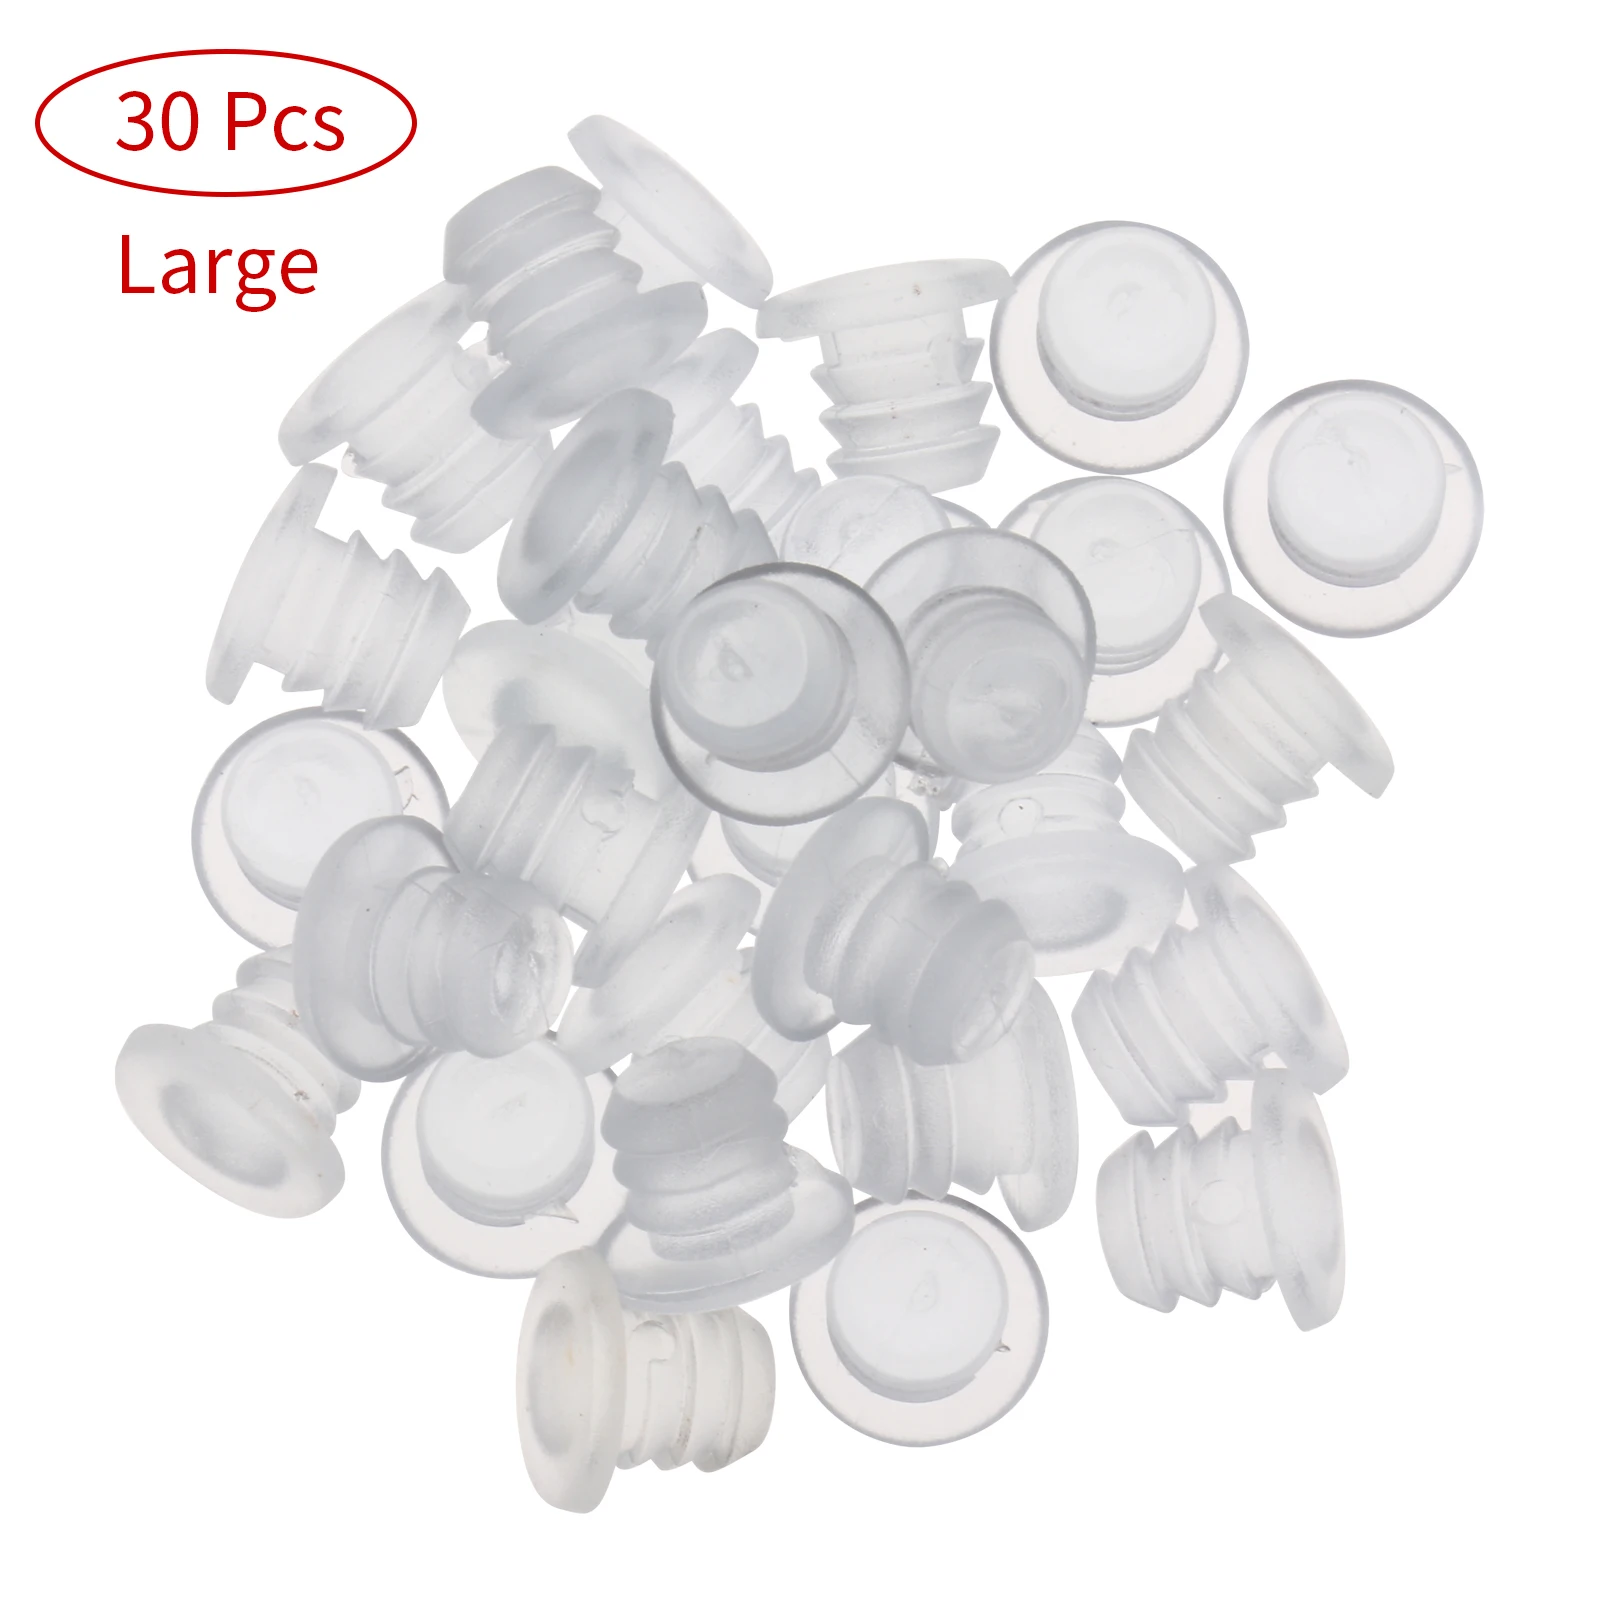 Details about   30x Rubber Glass Table Top Spacer Anti Collision Embedded Soft Stem Bumper US 